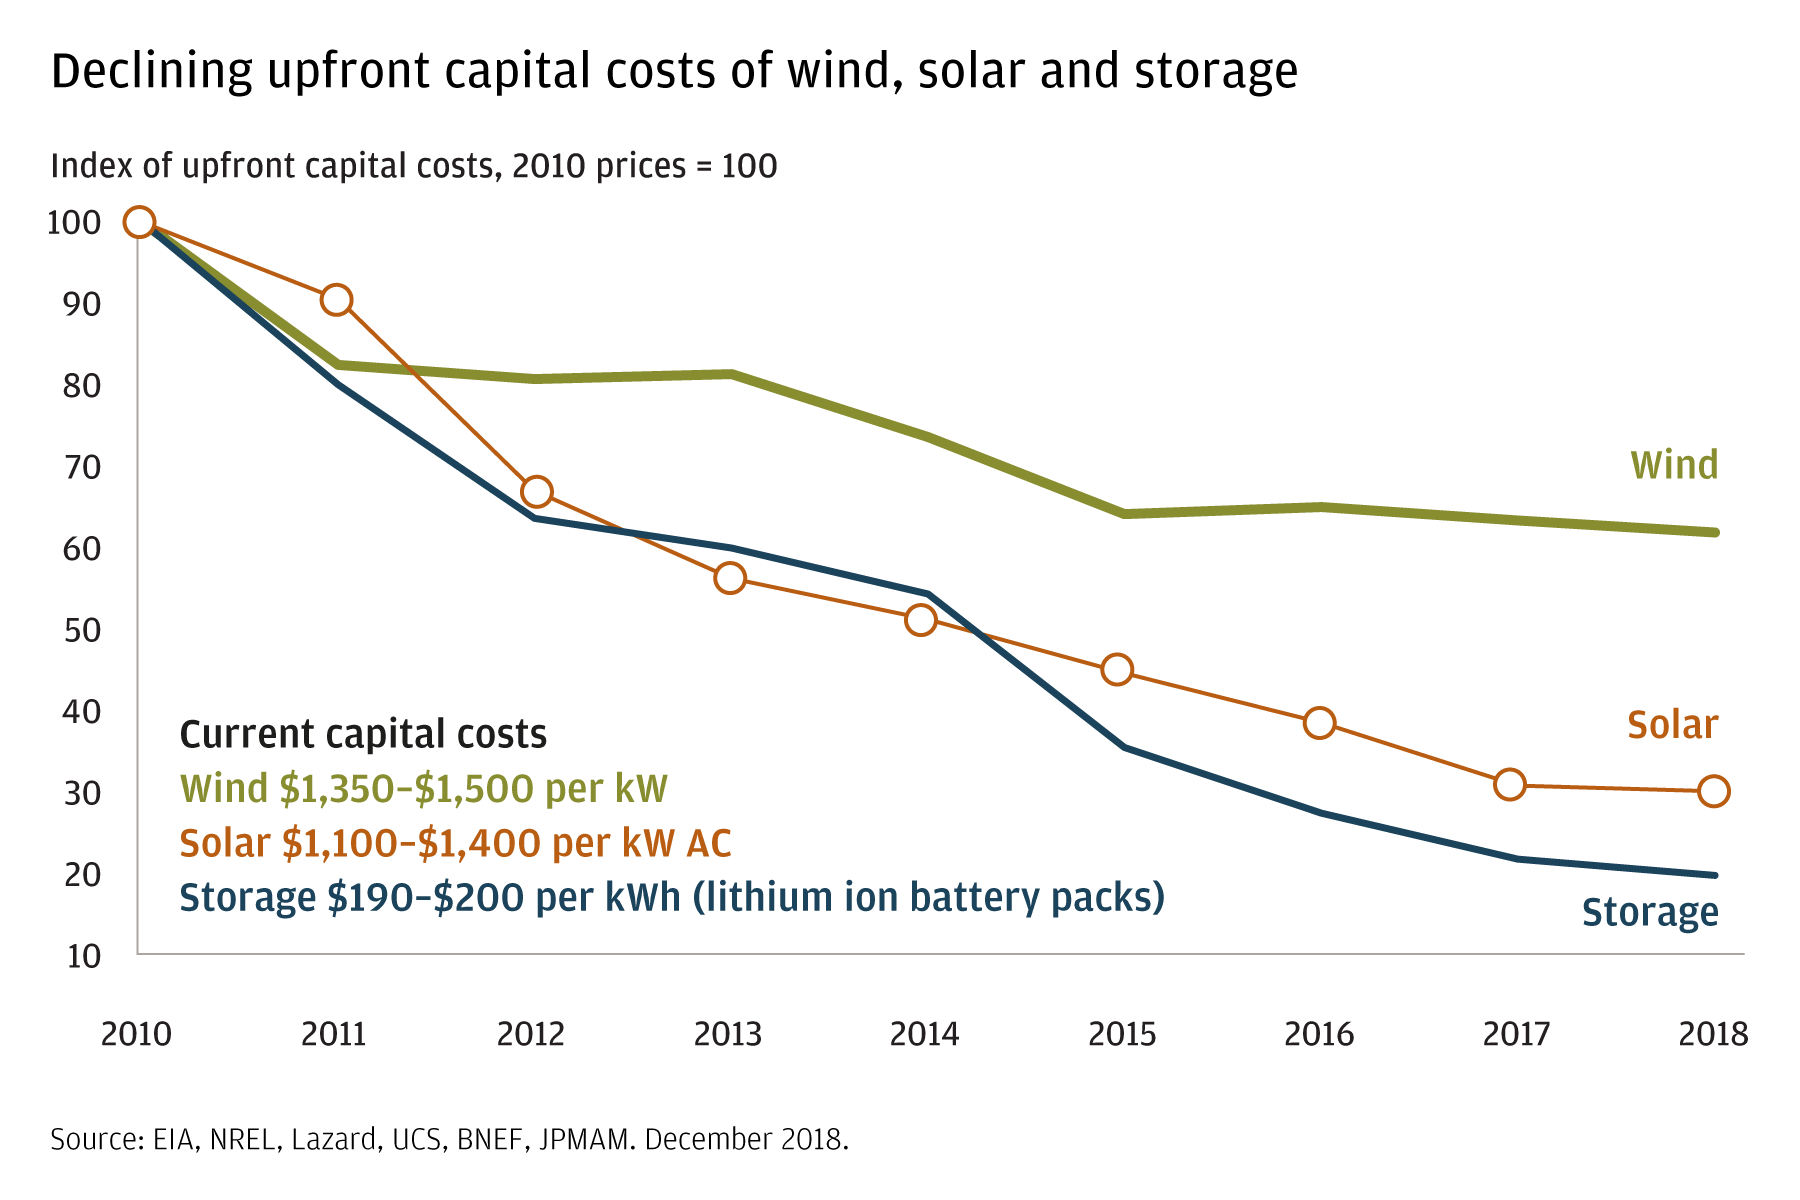 This three-line chart shows the declining upfront costs of wind, solar, and storage. 